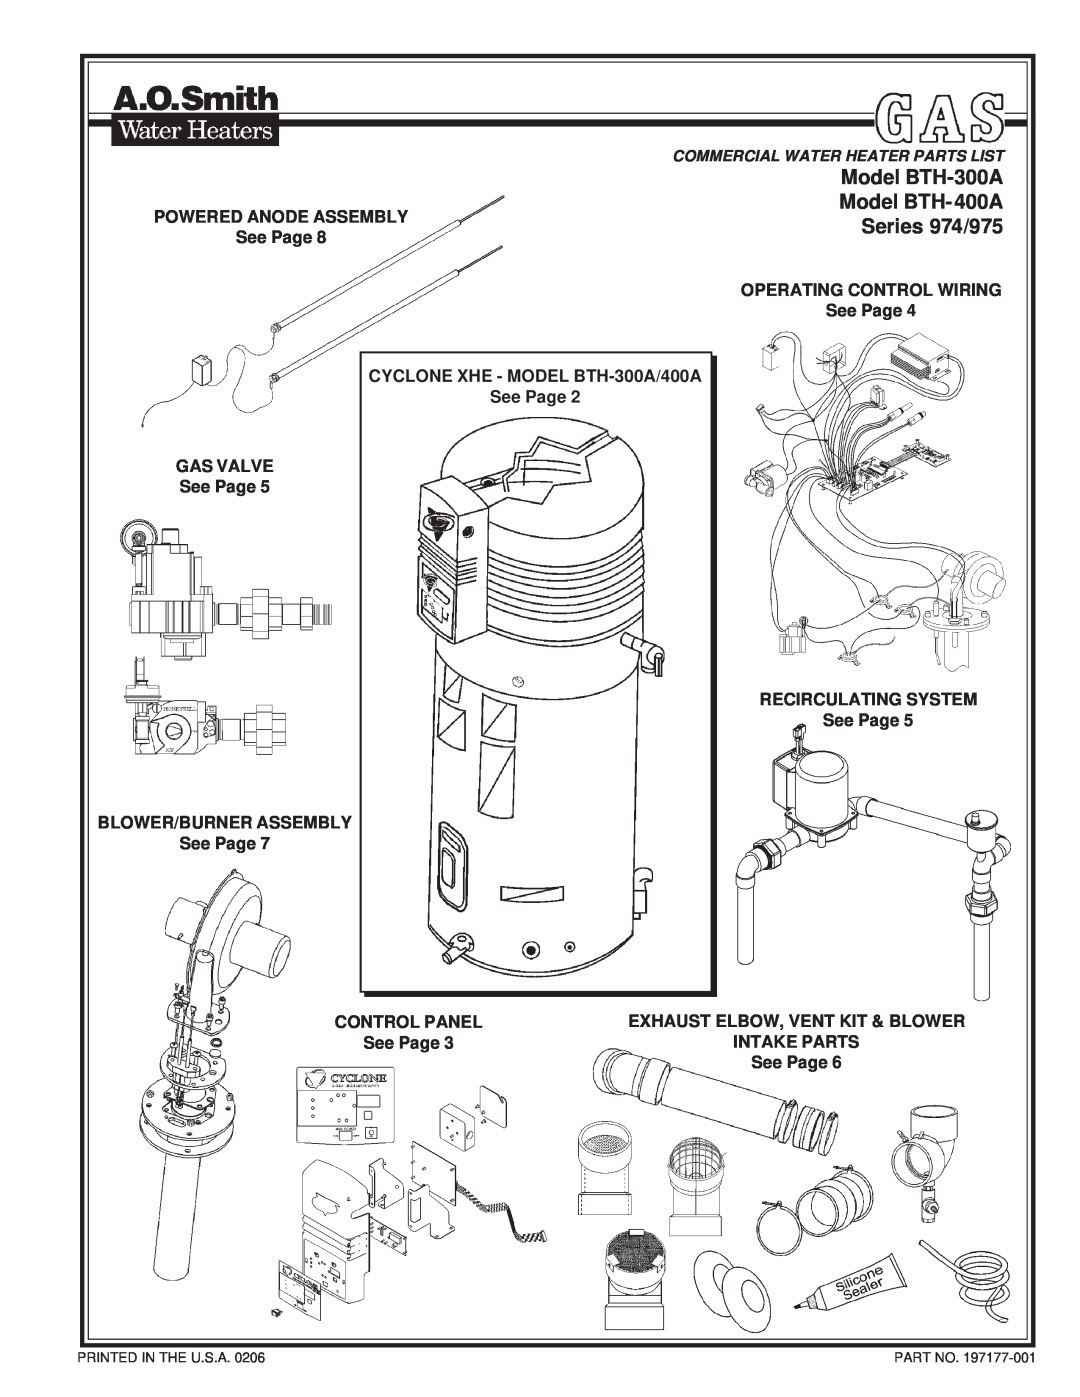 A.O. Smith 974 Series manual POWERED ANODE ASSEMBLYSeries 974/975 See Page, BLOWER/BURNER ASSEMBLY See Page, Control Panel 